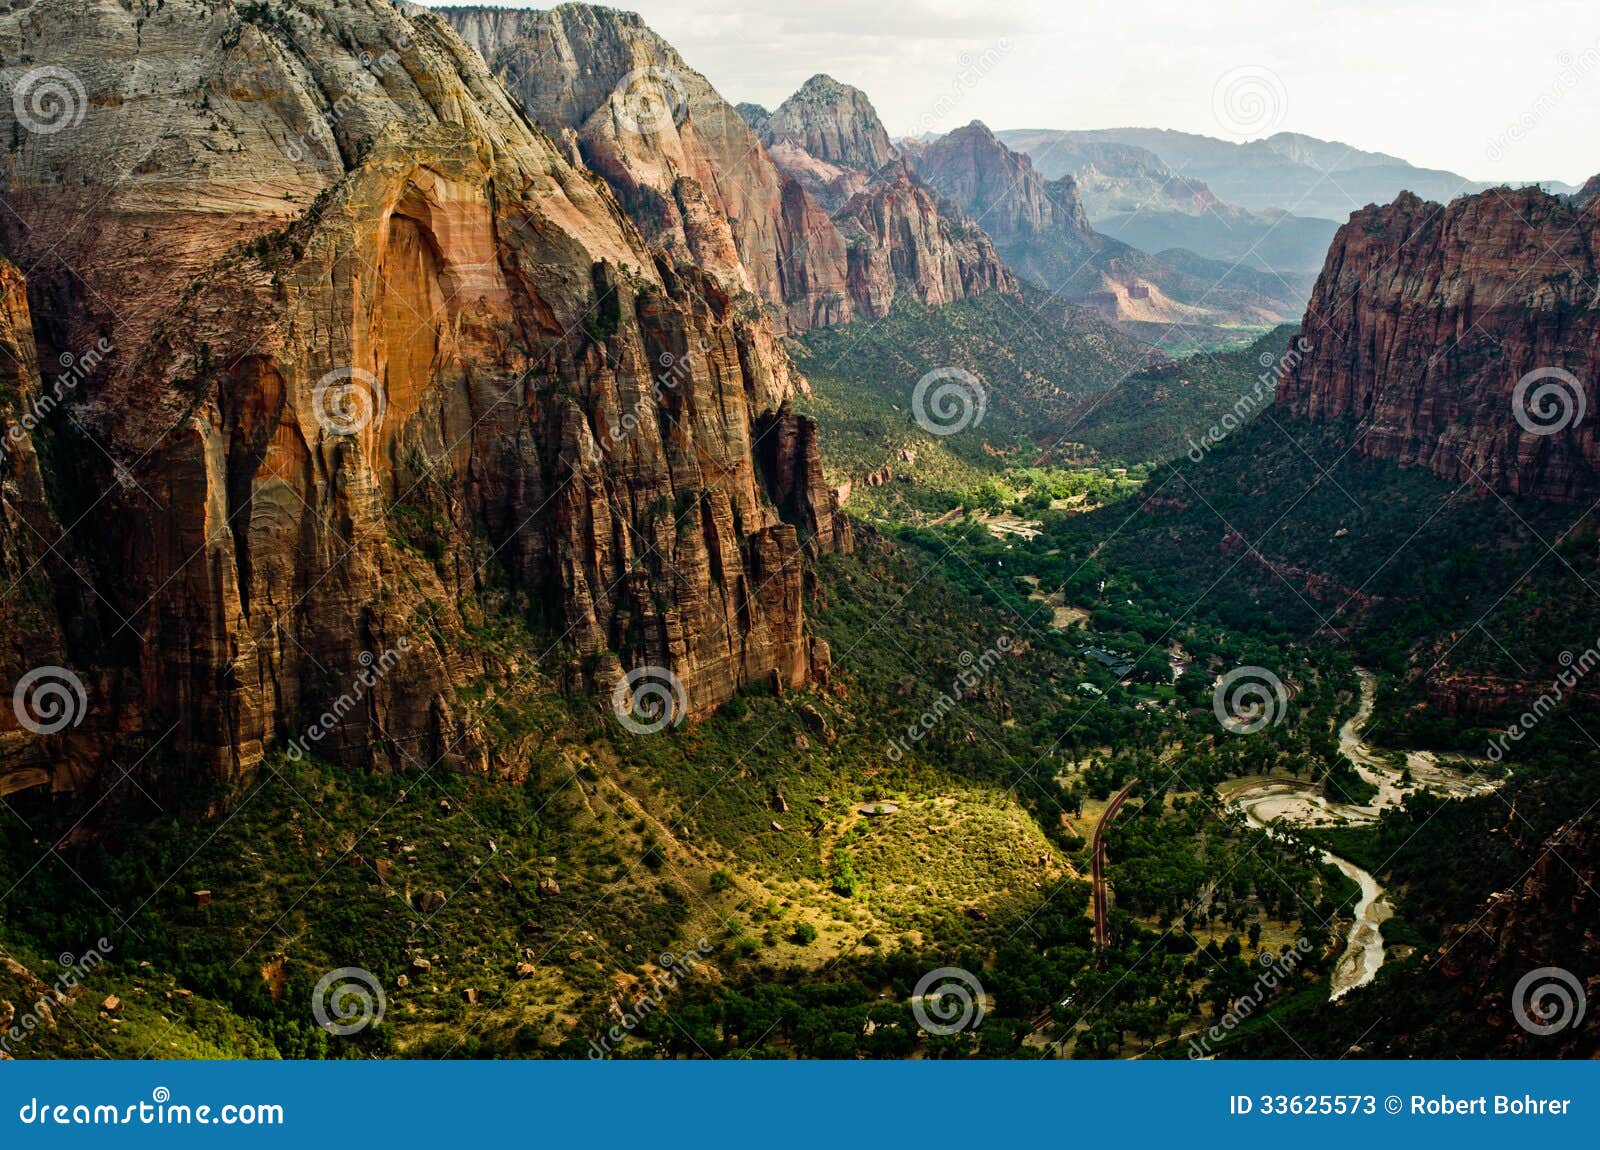 zion canyon as seen from angels landing at zion national park